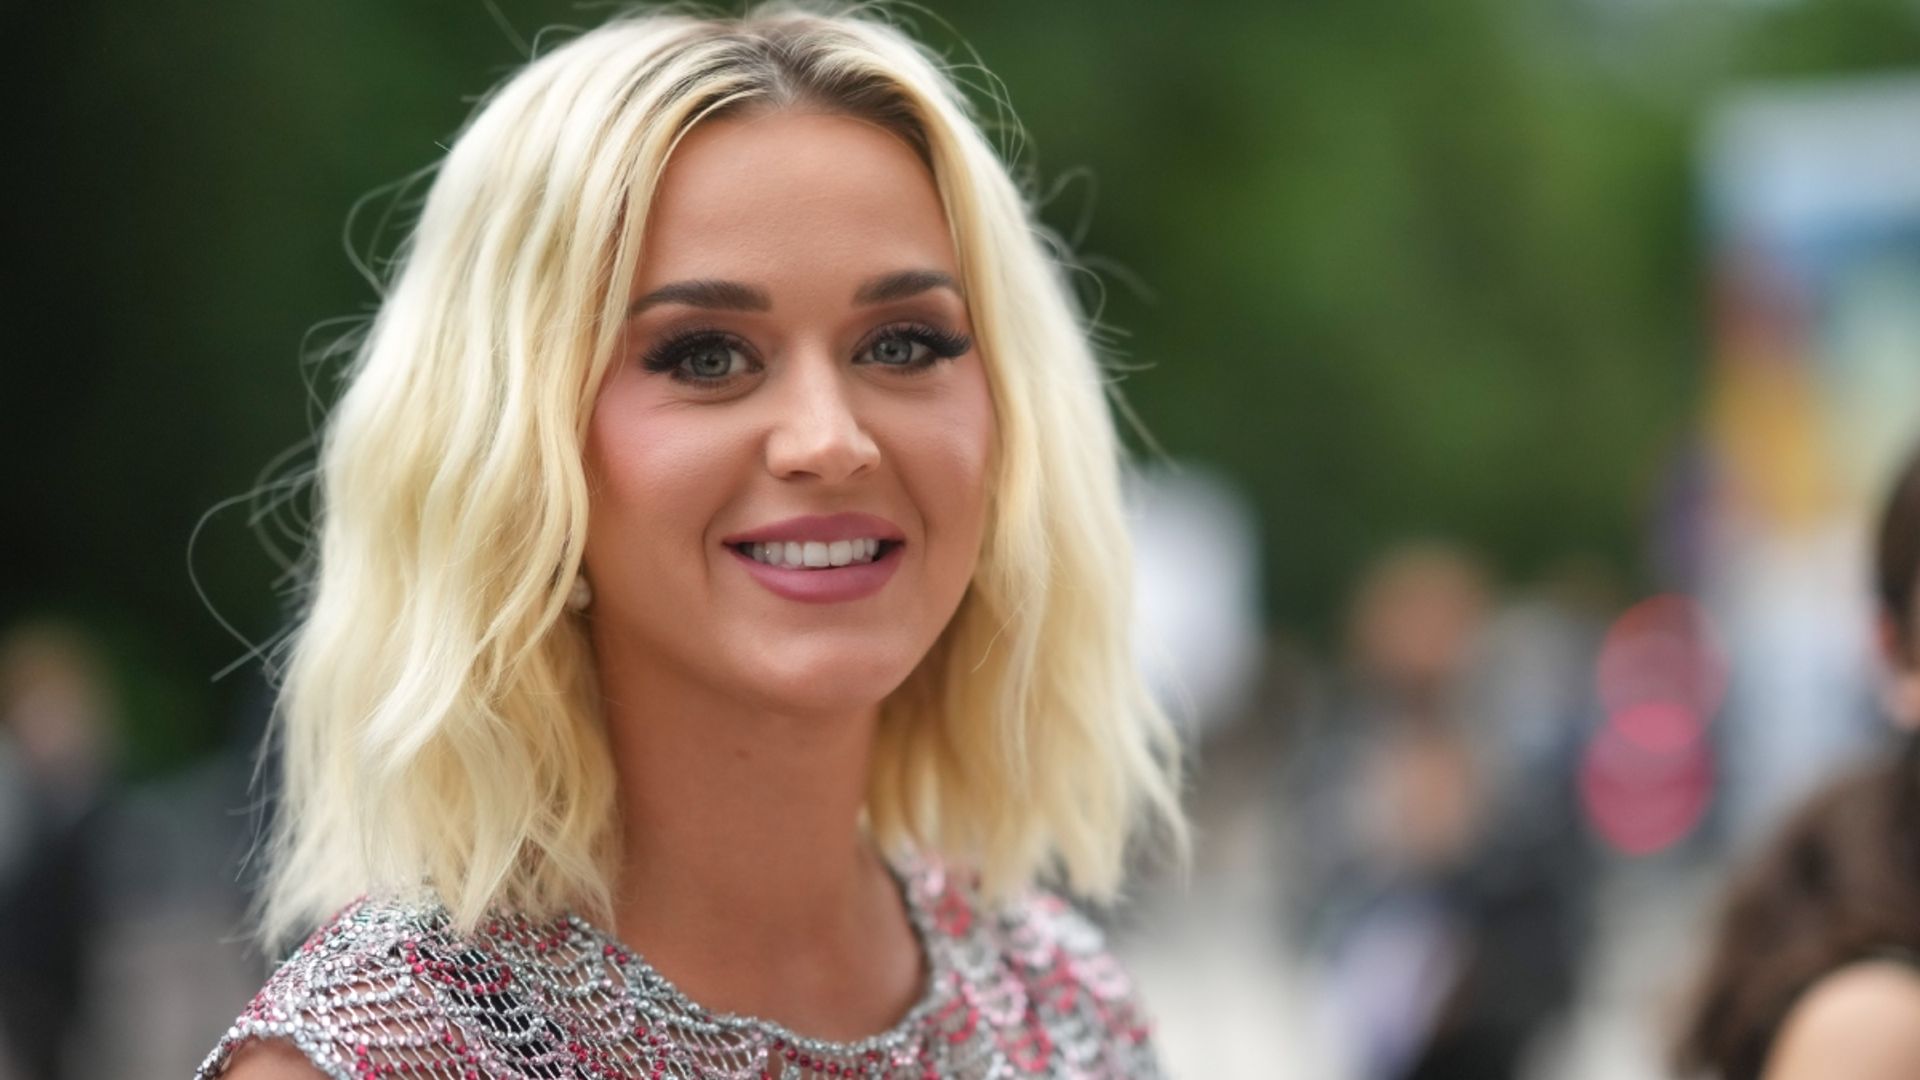 Katy Perry's vacation diaries continue with stunning pictures from her next destination